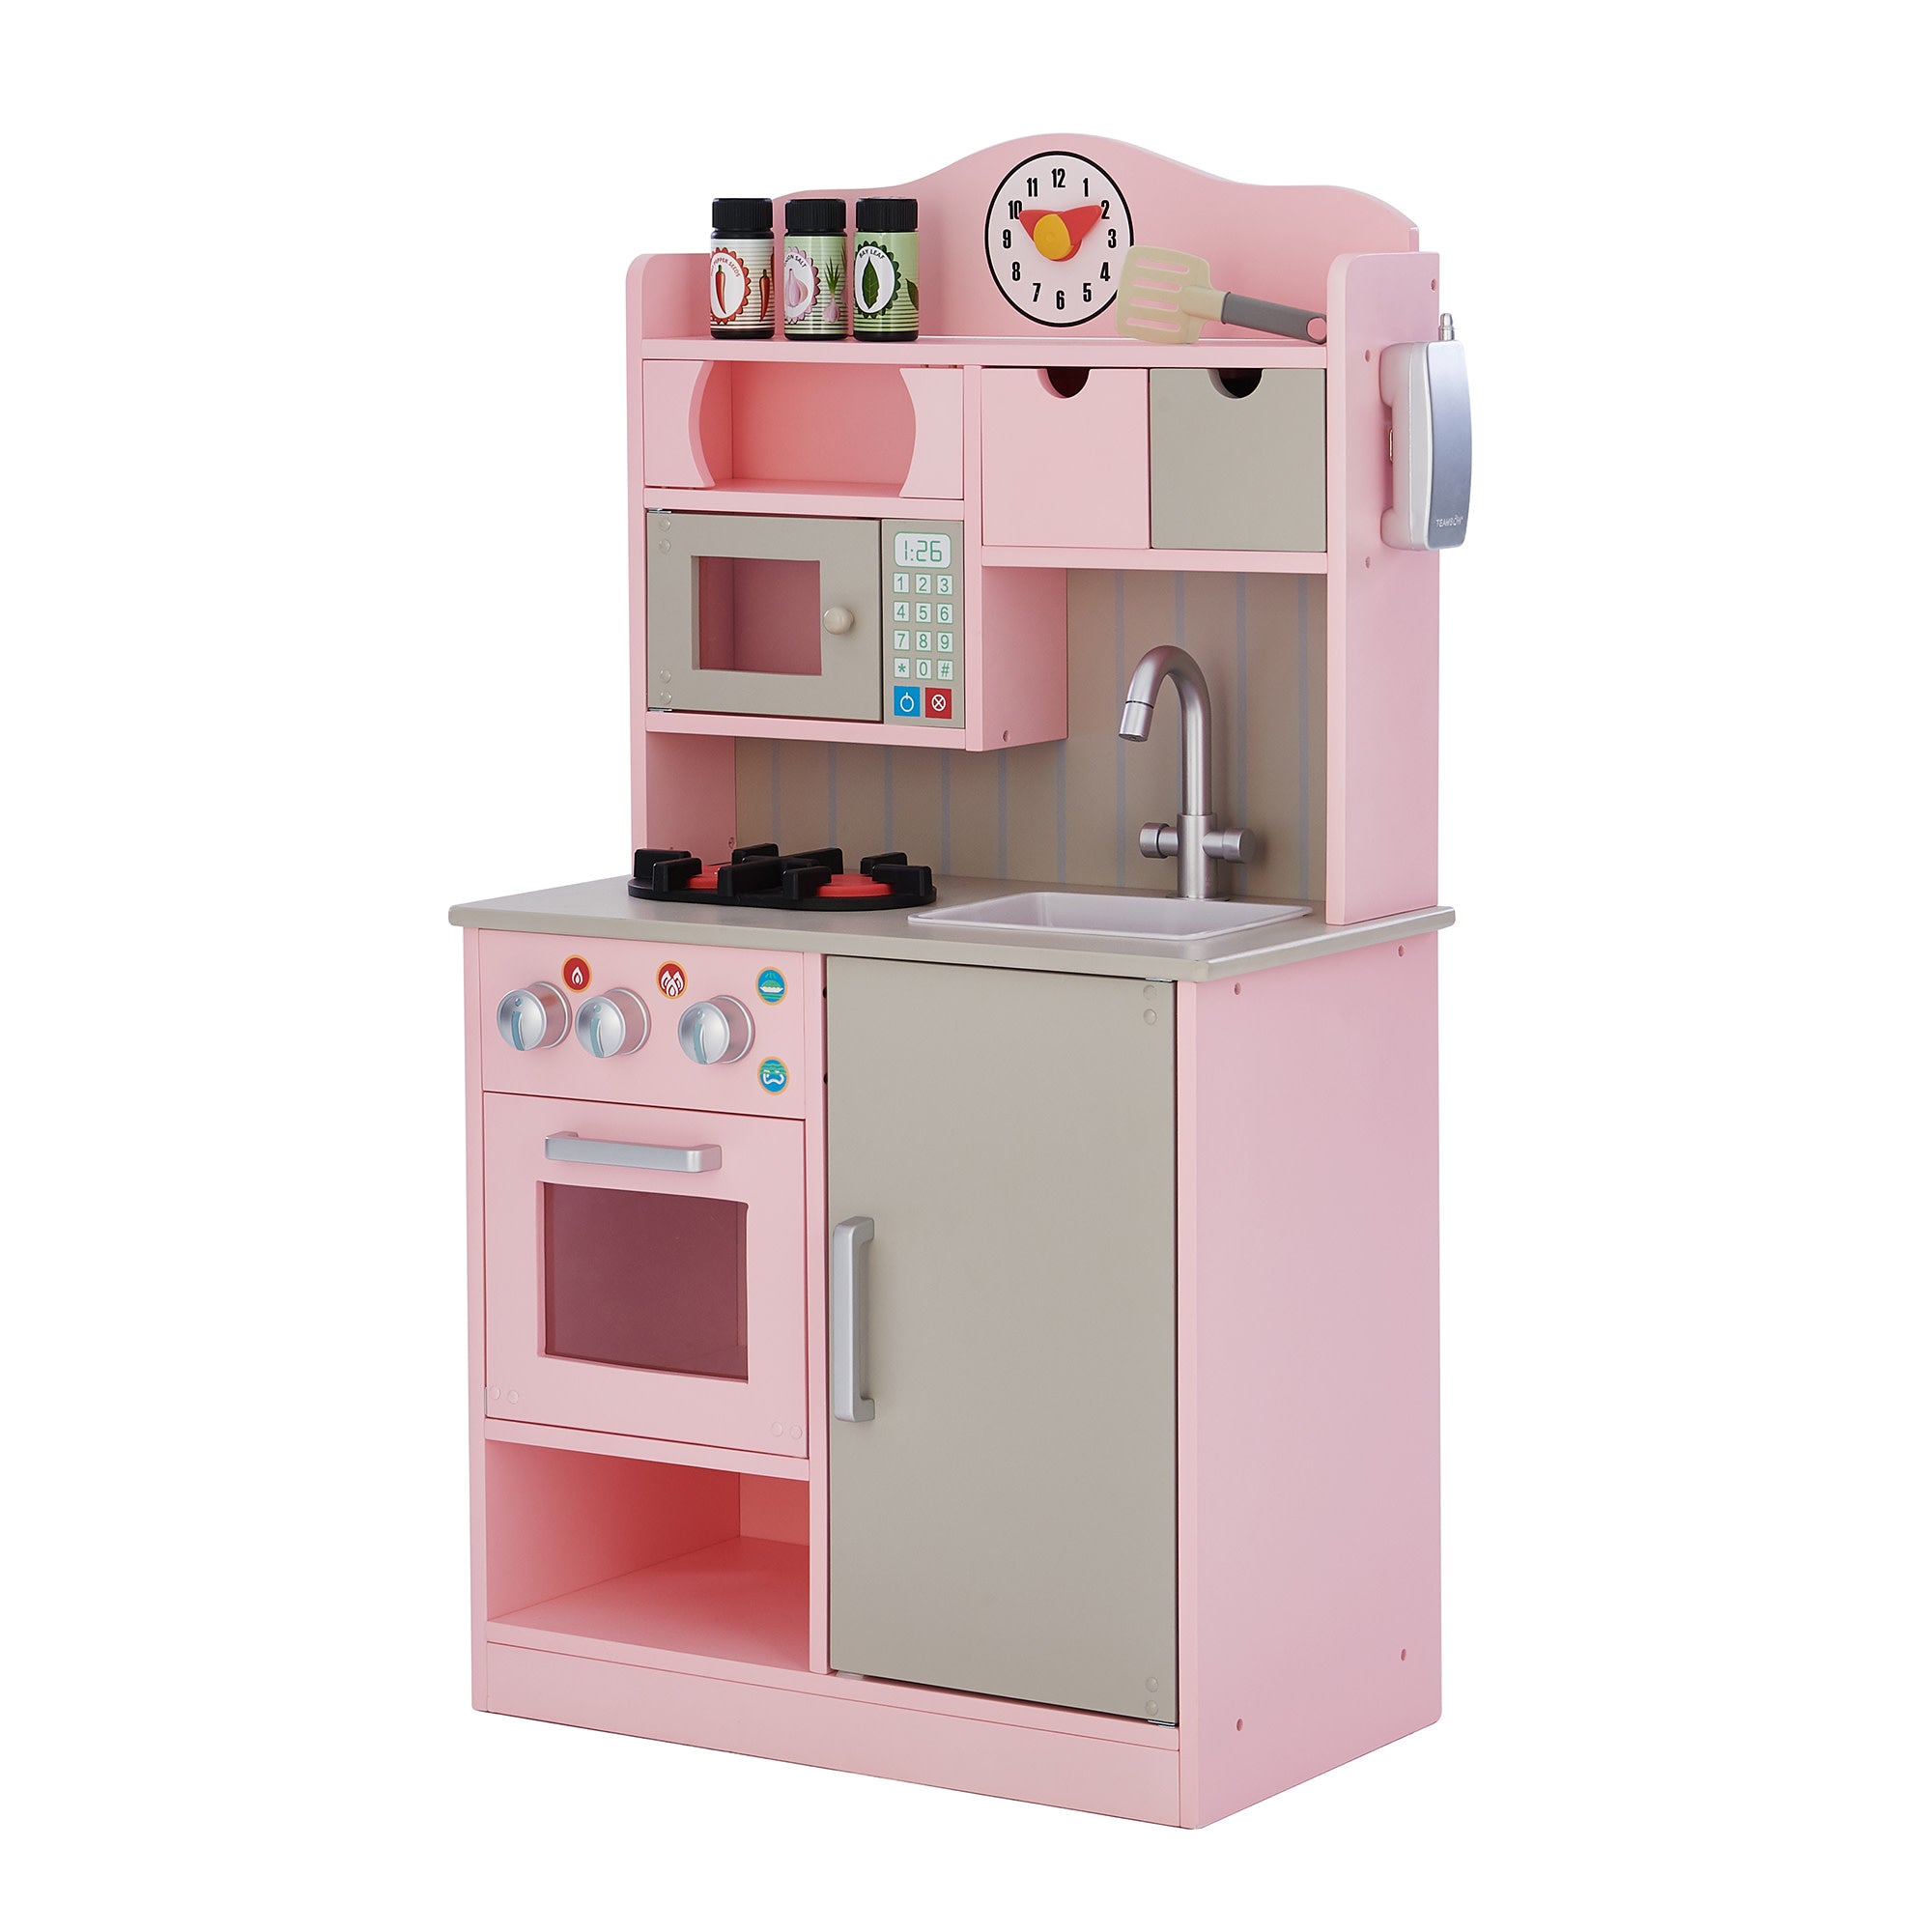 Teen says pink toy ovens discourage boys from kitchen play